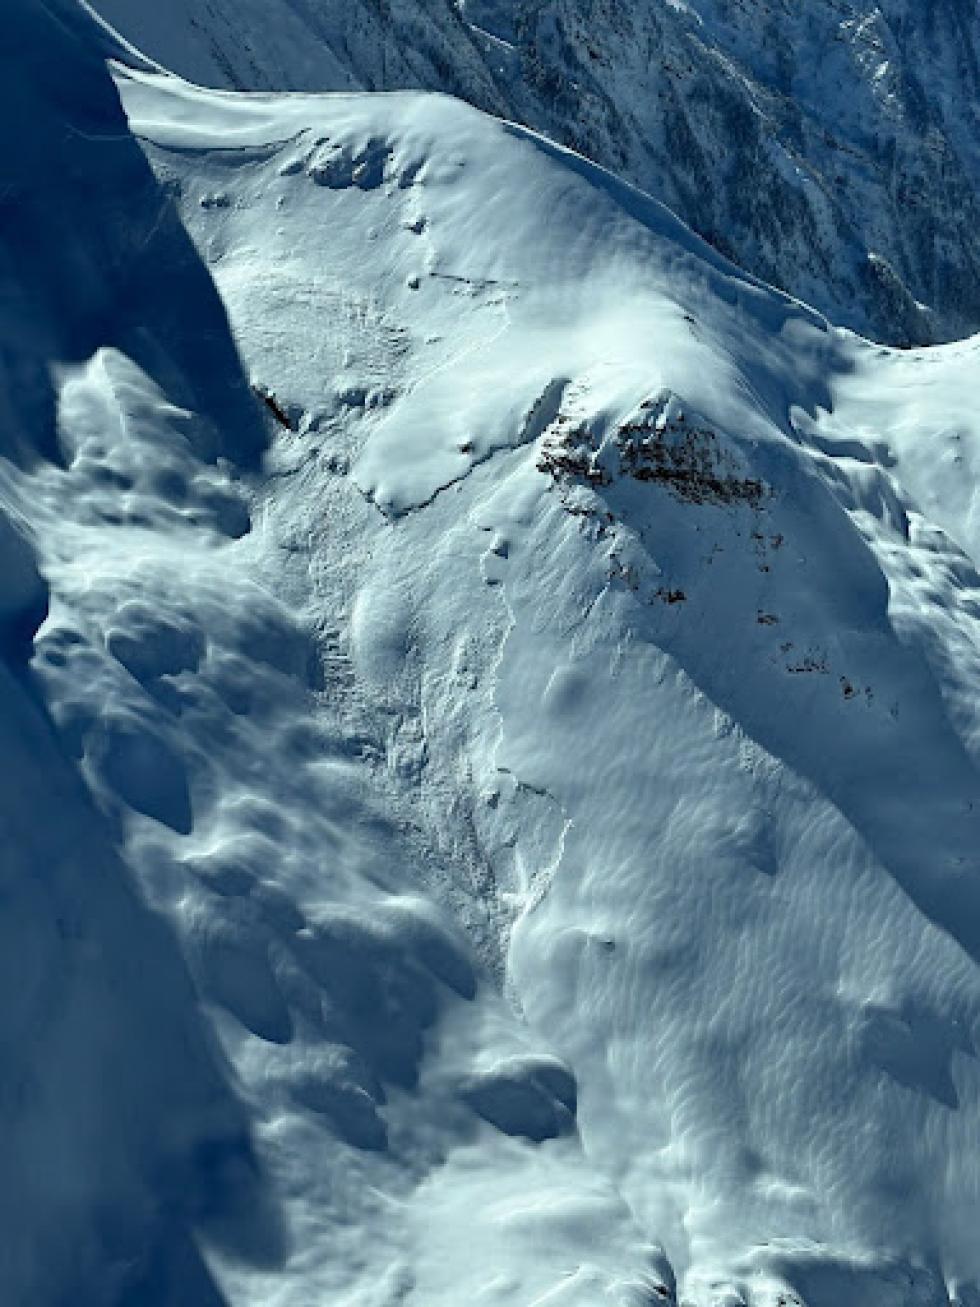 The image below taken after the late October storm shows a large avalanche that broke in Yule Creek on a north-facing slope.